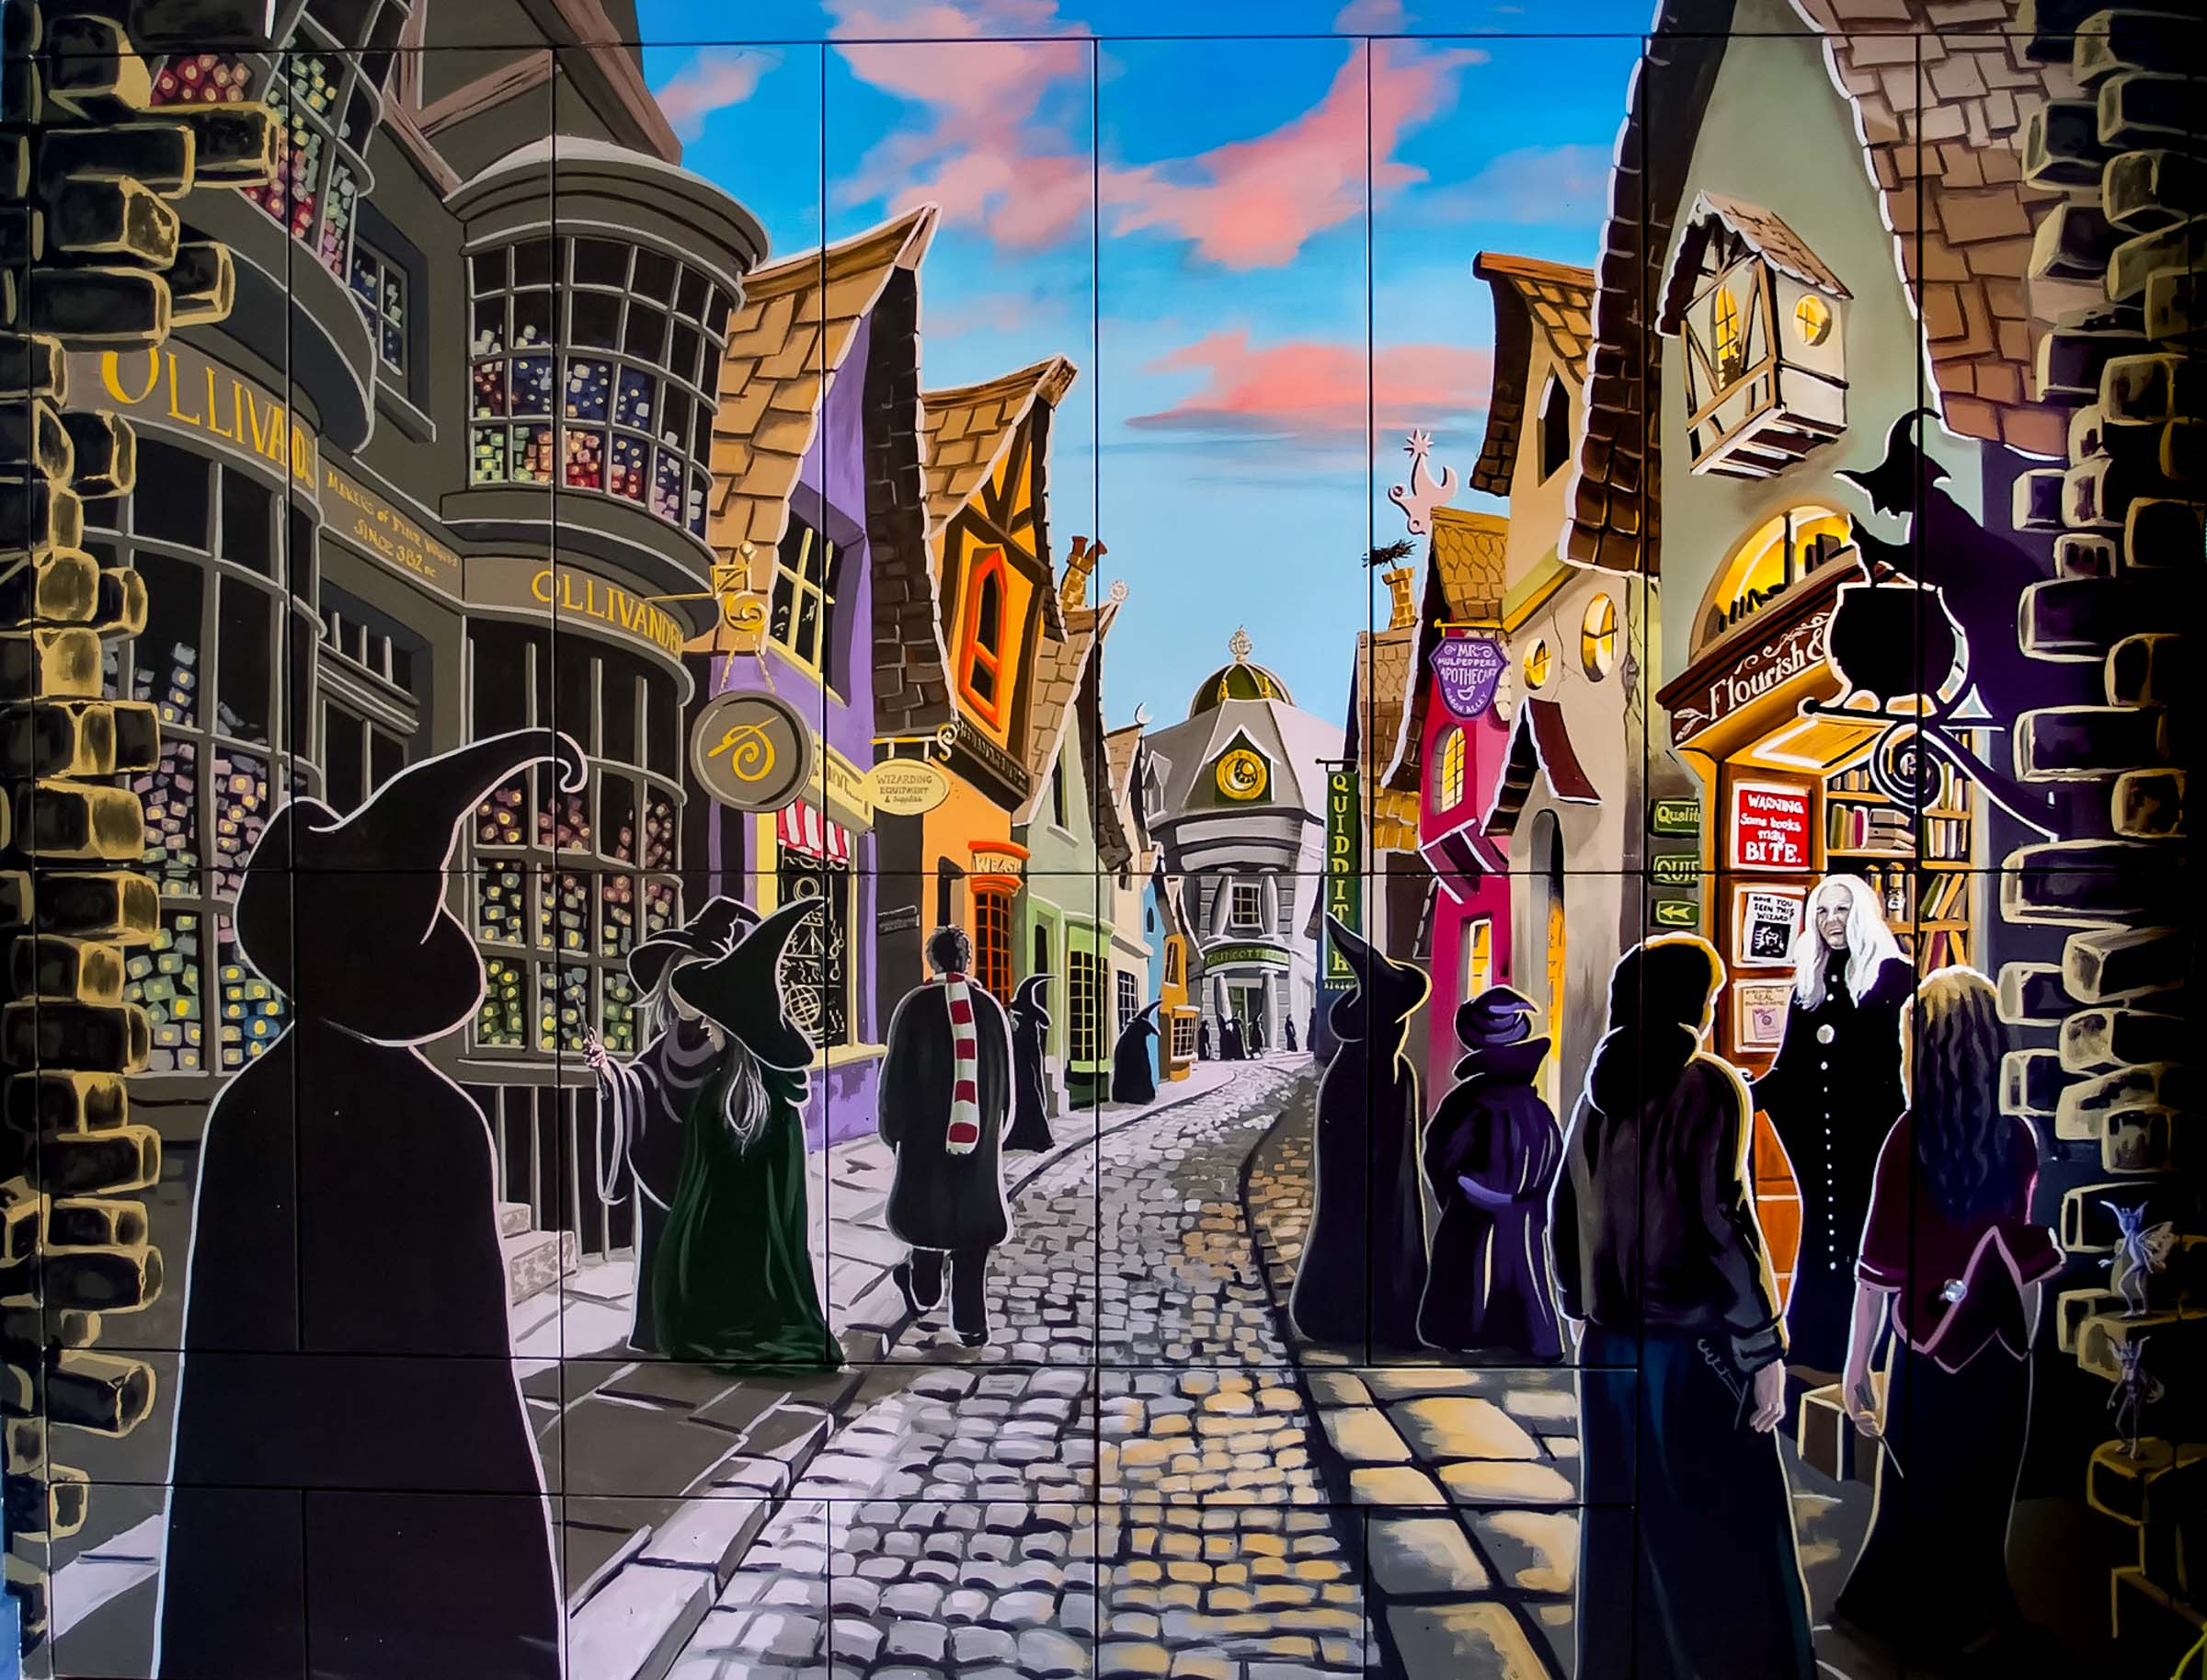 Diagon Alley mural detail with Ollivanders wand shop, Flouriish and Blotts bookshop, quiditch supplies, Mr Mulpepper's Apothecary and Gringotts Bank